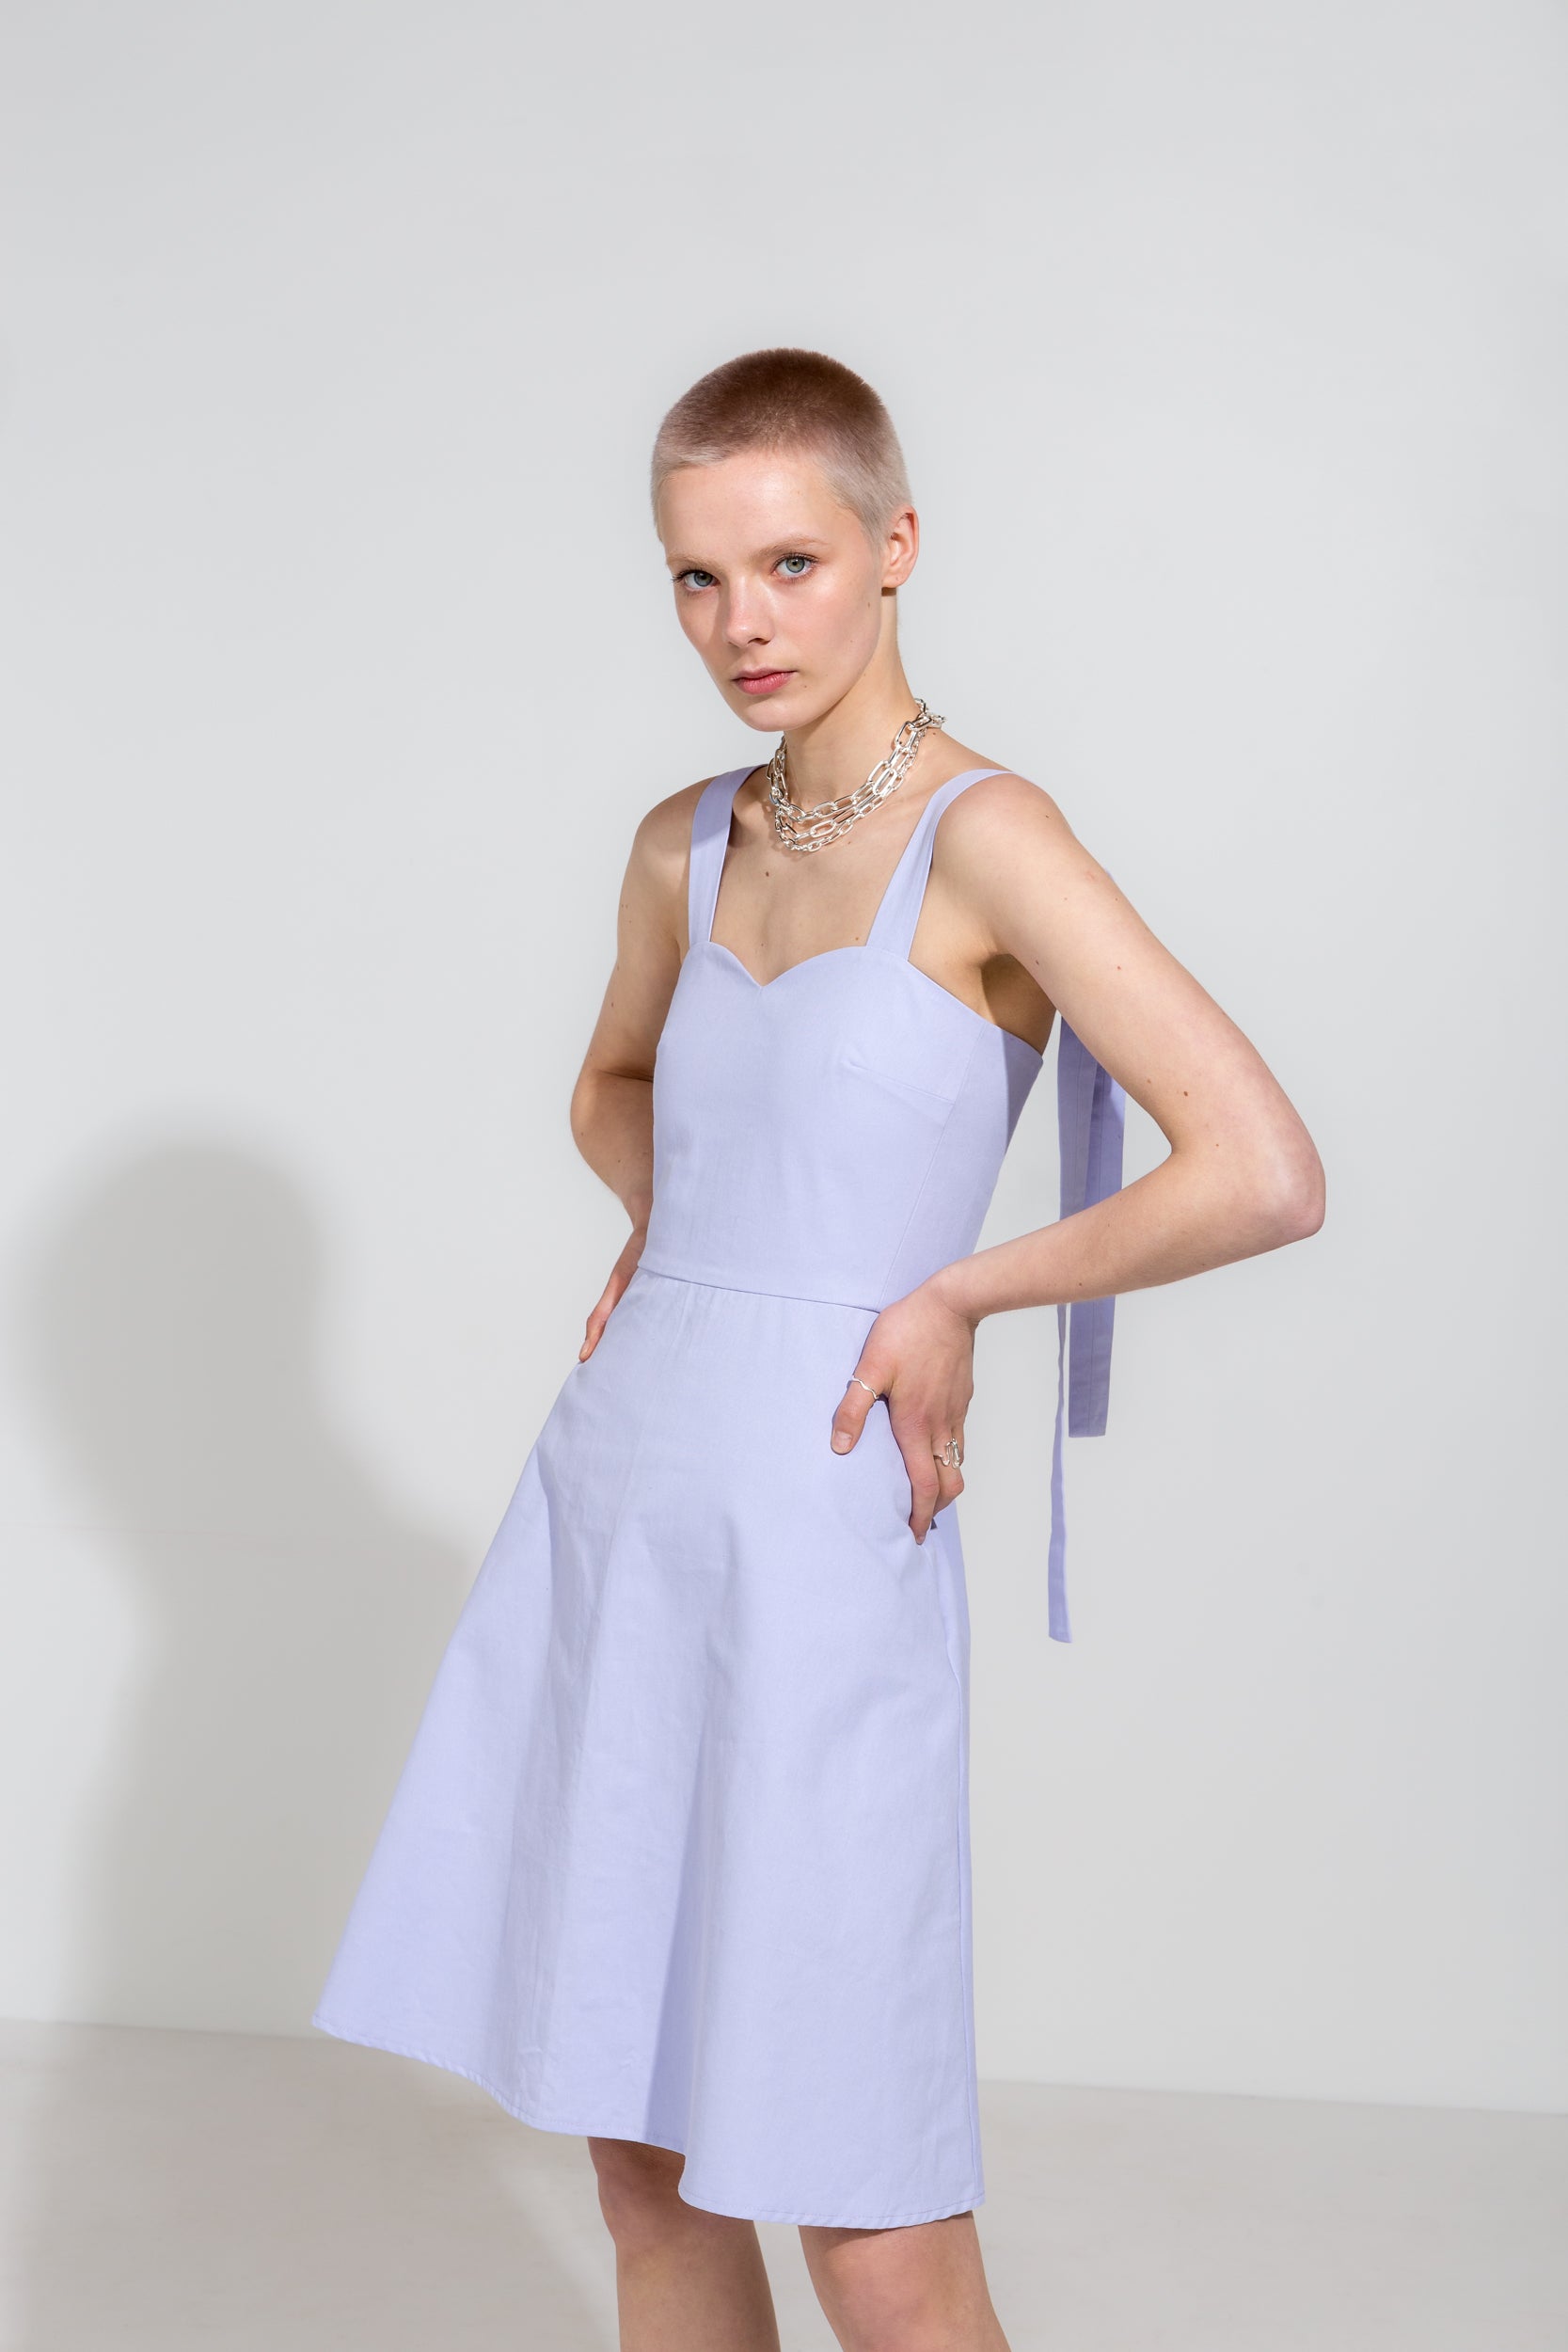 Icy lilac strapless dress in organic cotton